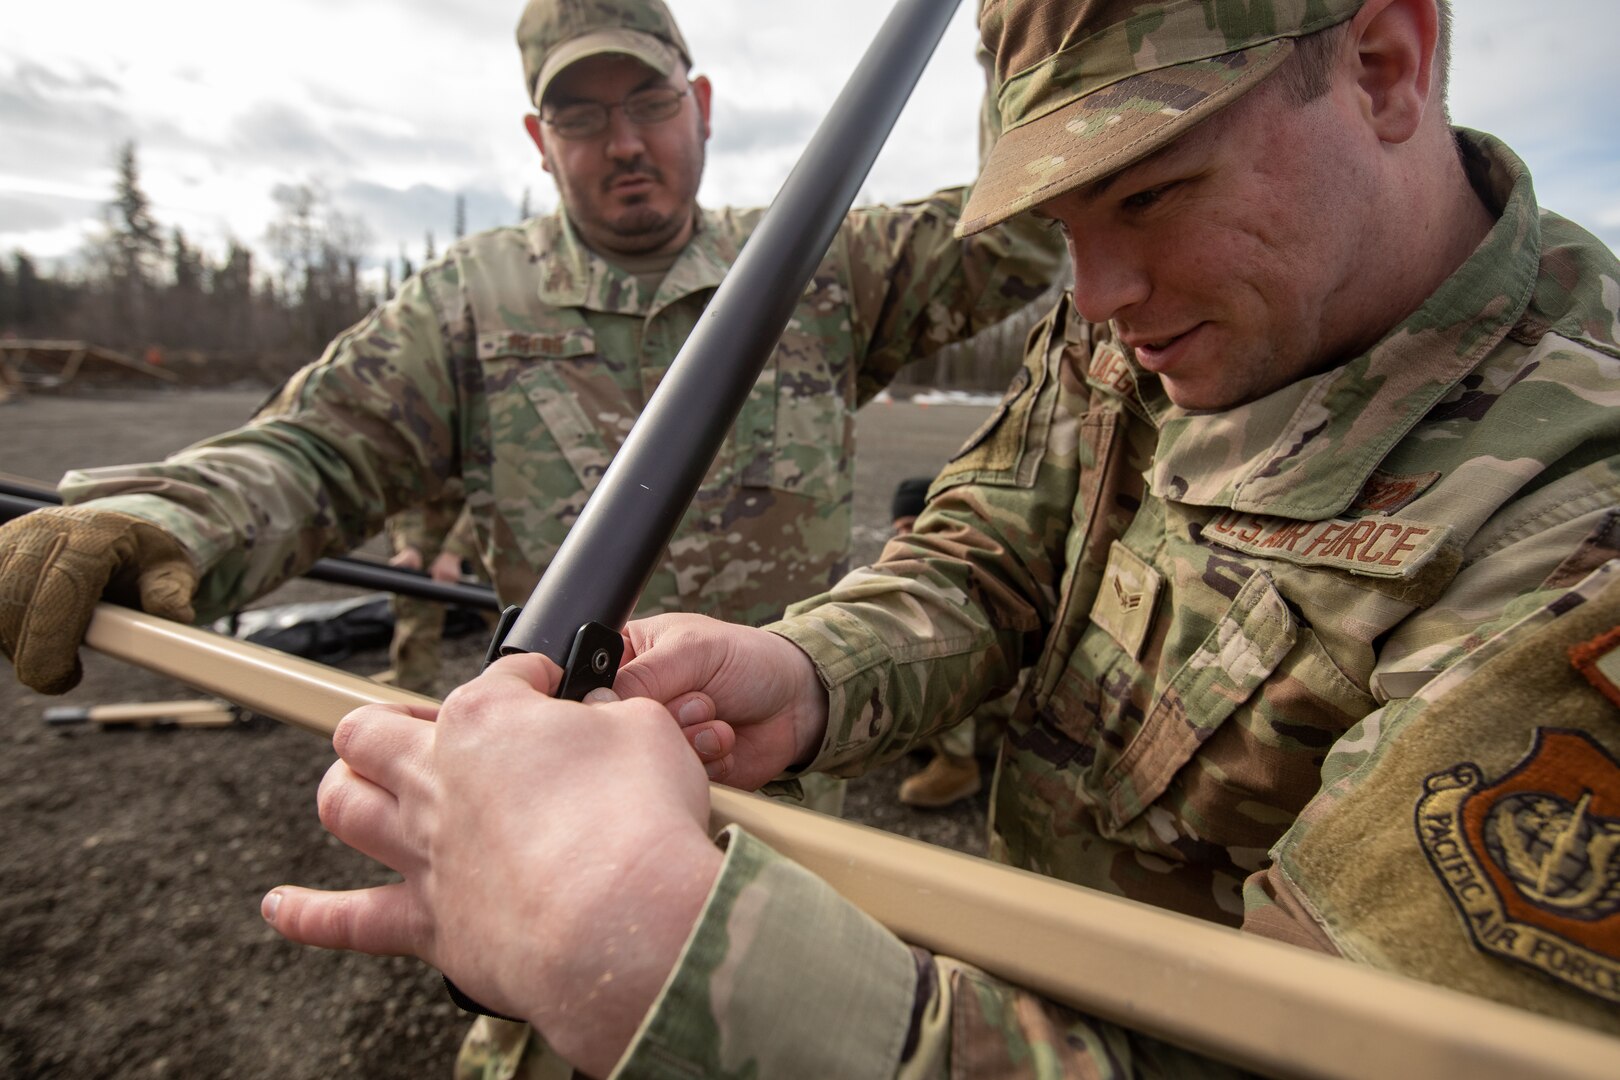 U.S. Air Force Airman 1st Class Matthew Jaeger, a water and fuel systems maintenance journeyman, right, and Tech. Sgt. Austin Myers, a water and fuel systems maintenance supervisor, left, both assigned to 773rd Civil Engineer Squadron, assemble rafters for an Agile Combat Employment air transportable clinic, during Northern Edge 23-1 at Joint Base Elmendorf-Richardson, Alaska, May 9, 2023.